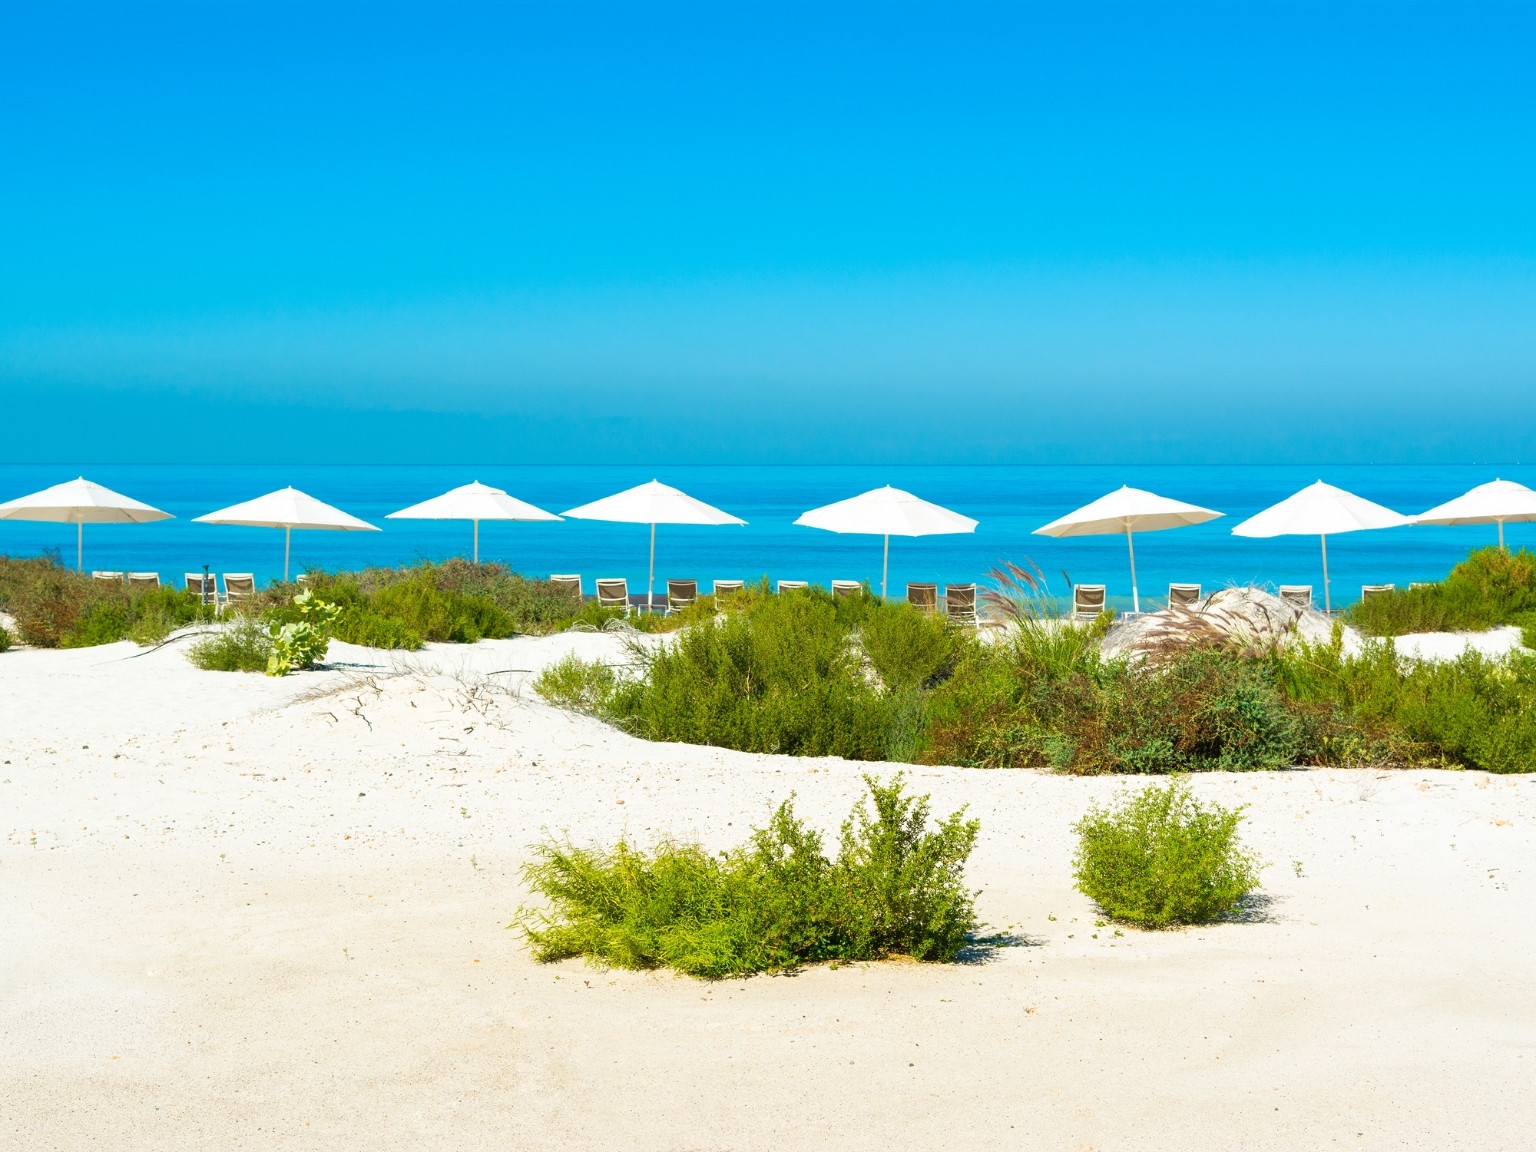 Saadiyat Beach Club in Abu Dhabi is a place to chill and unwind with family